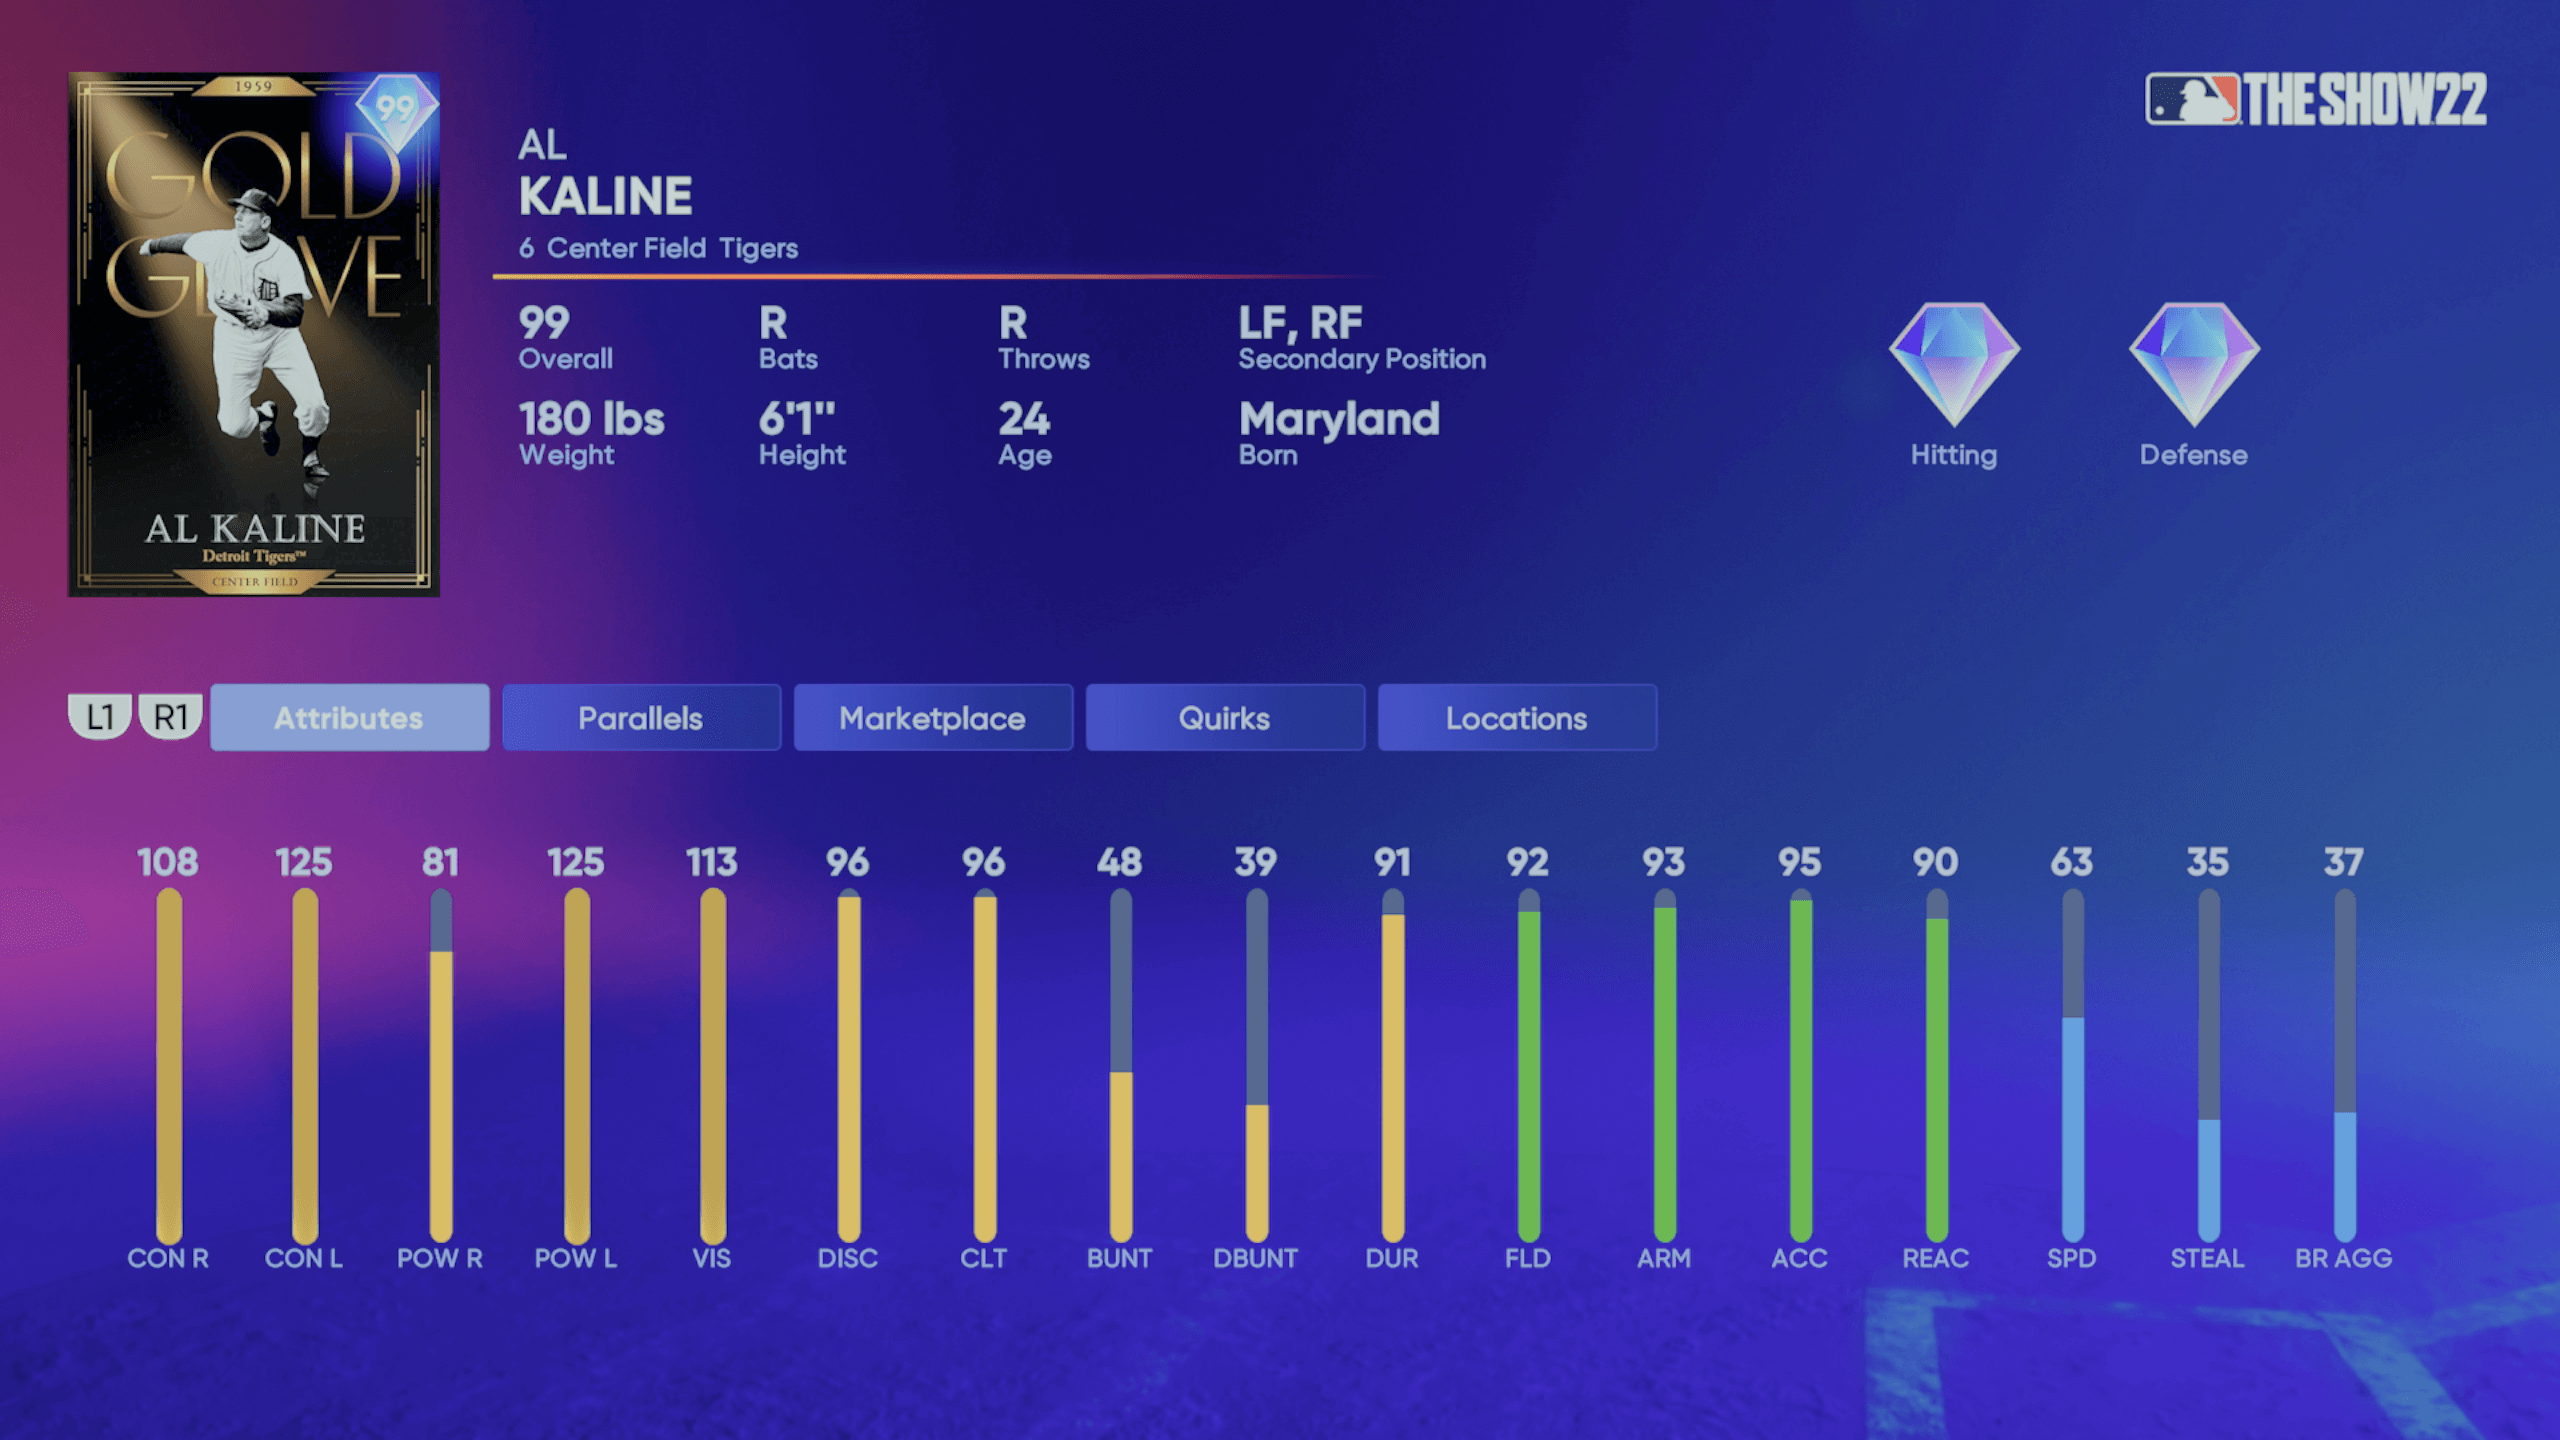 Hidden New Legends And Flashback Cards Found! MLB The Show 19 Diamond  Dynasty 